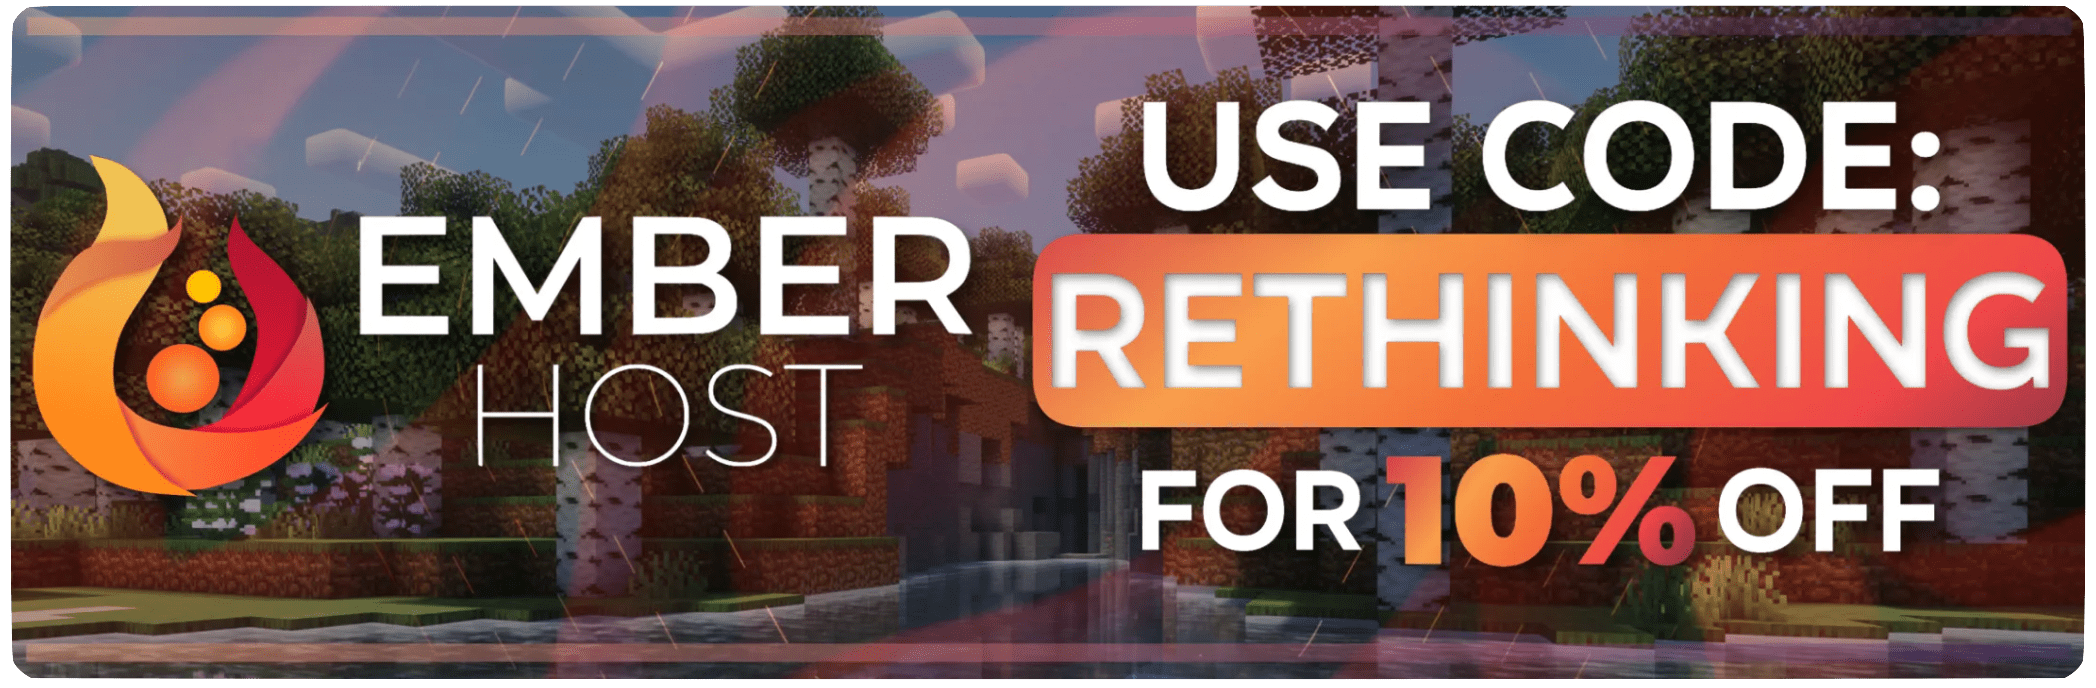 banner with text: Ember host - use code RETHINKING for 10% off